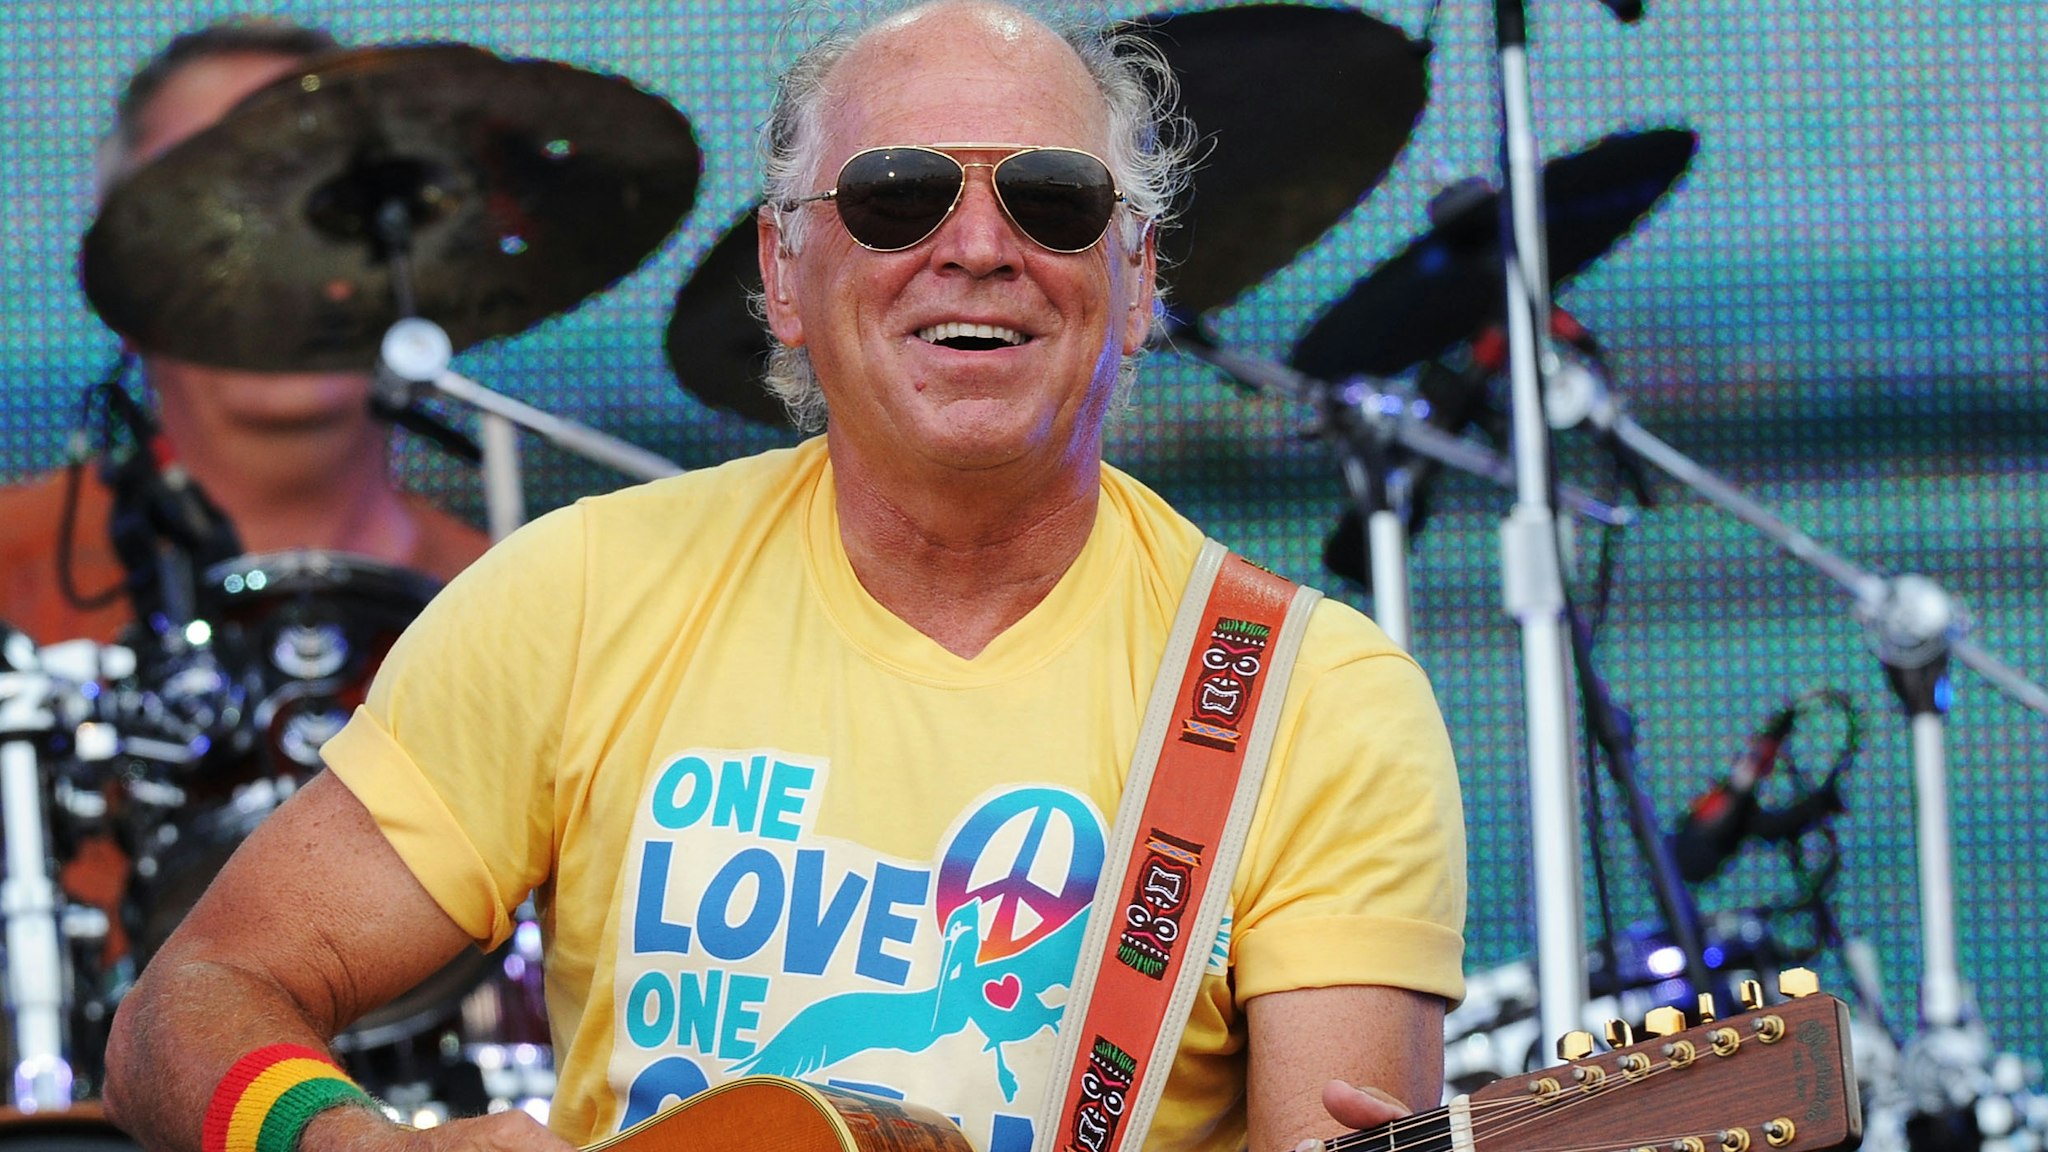 Musician Jimmy Buffett performs onstage at Jimmy Buffett & Friends: Live from the Gulf Coast, a concert presented by CMT at on the beach on July 11, 2010 in Gulf Shores, Alabama.